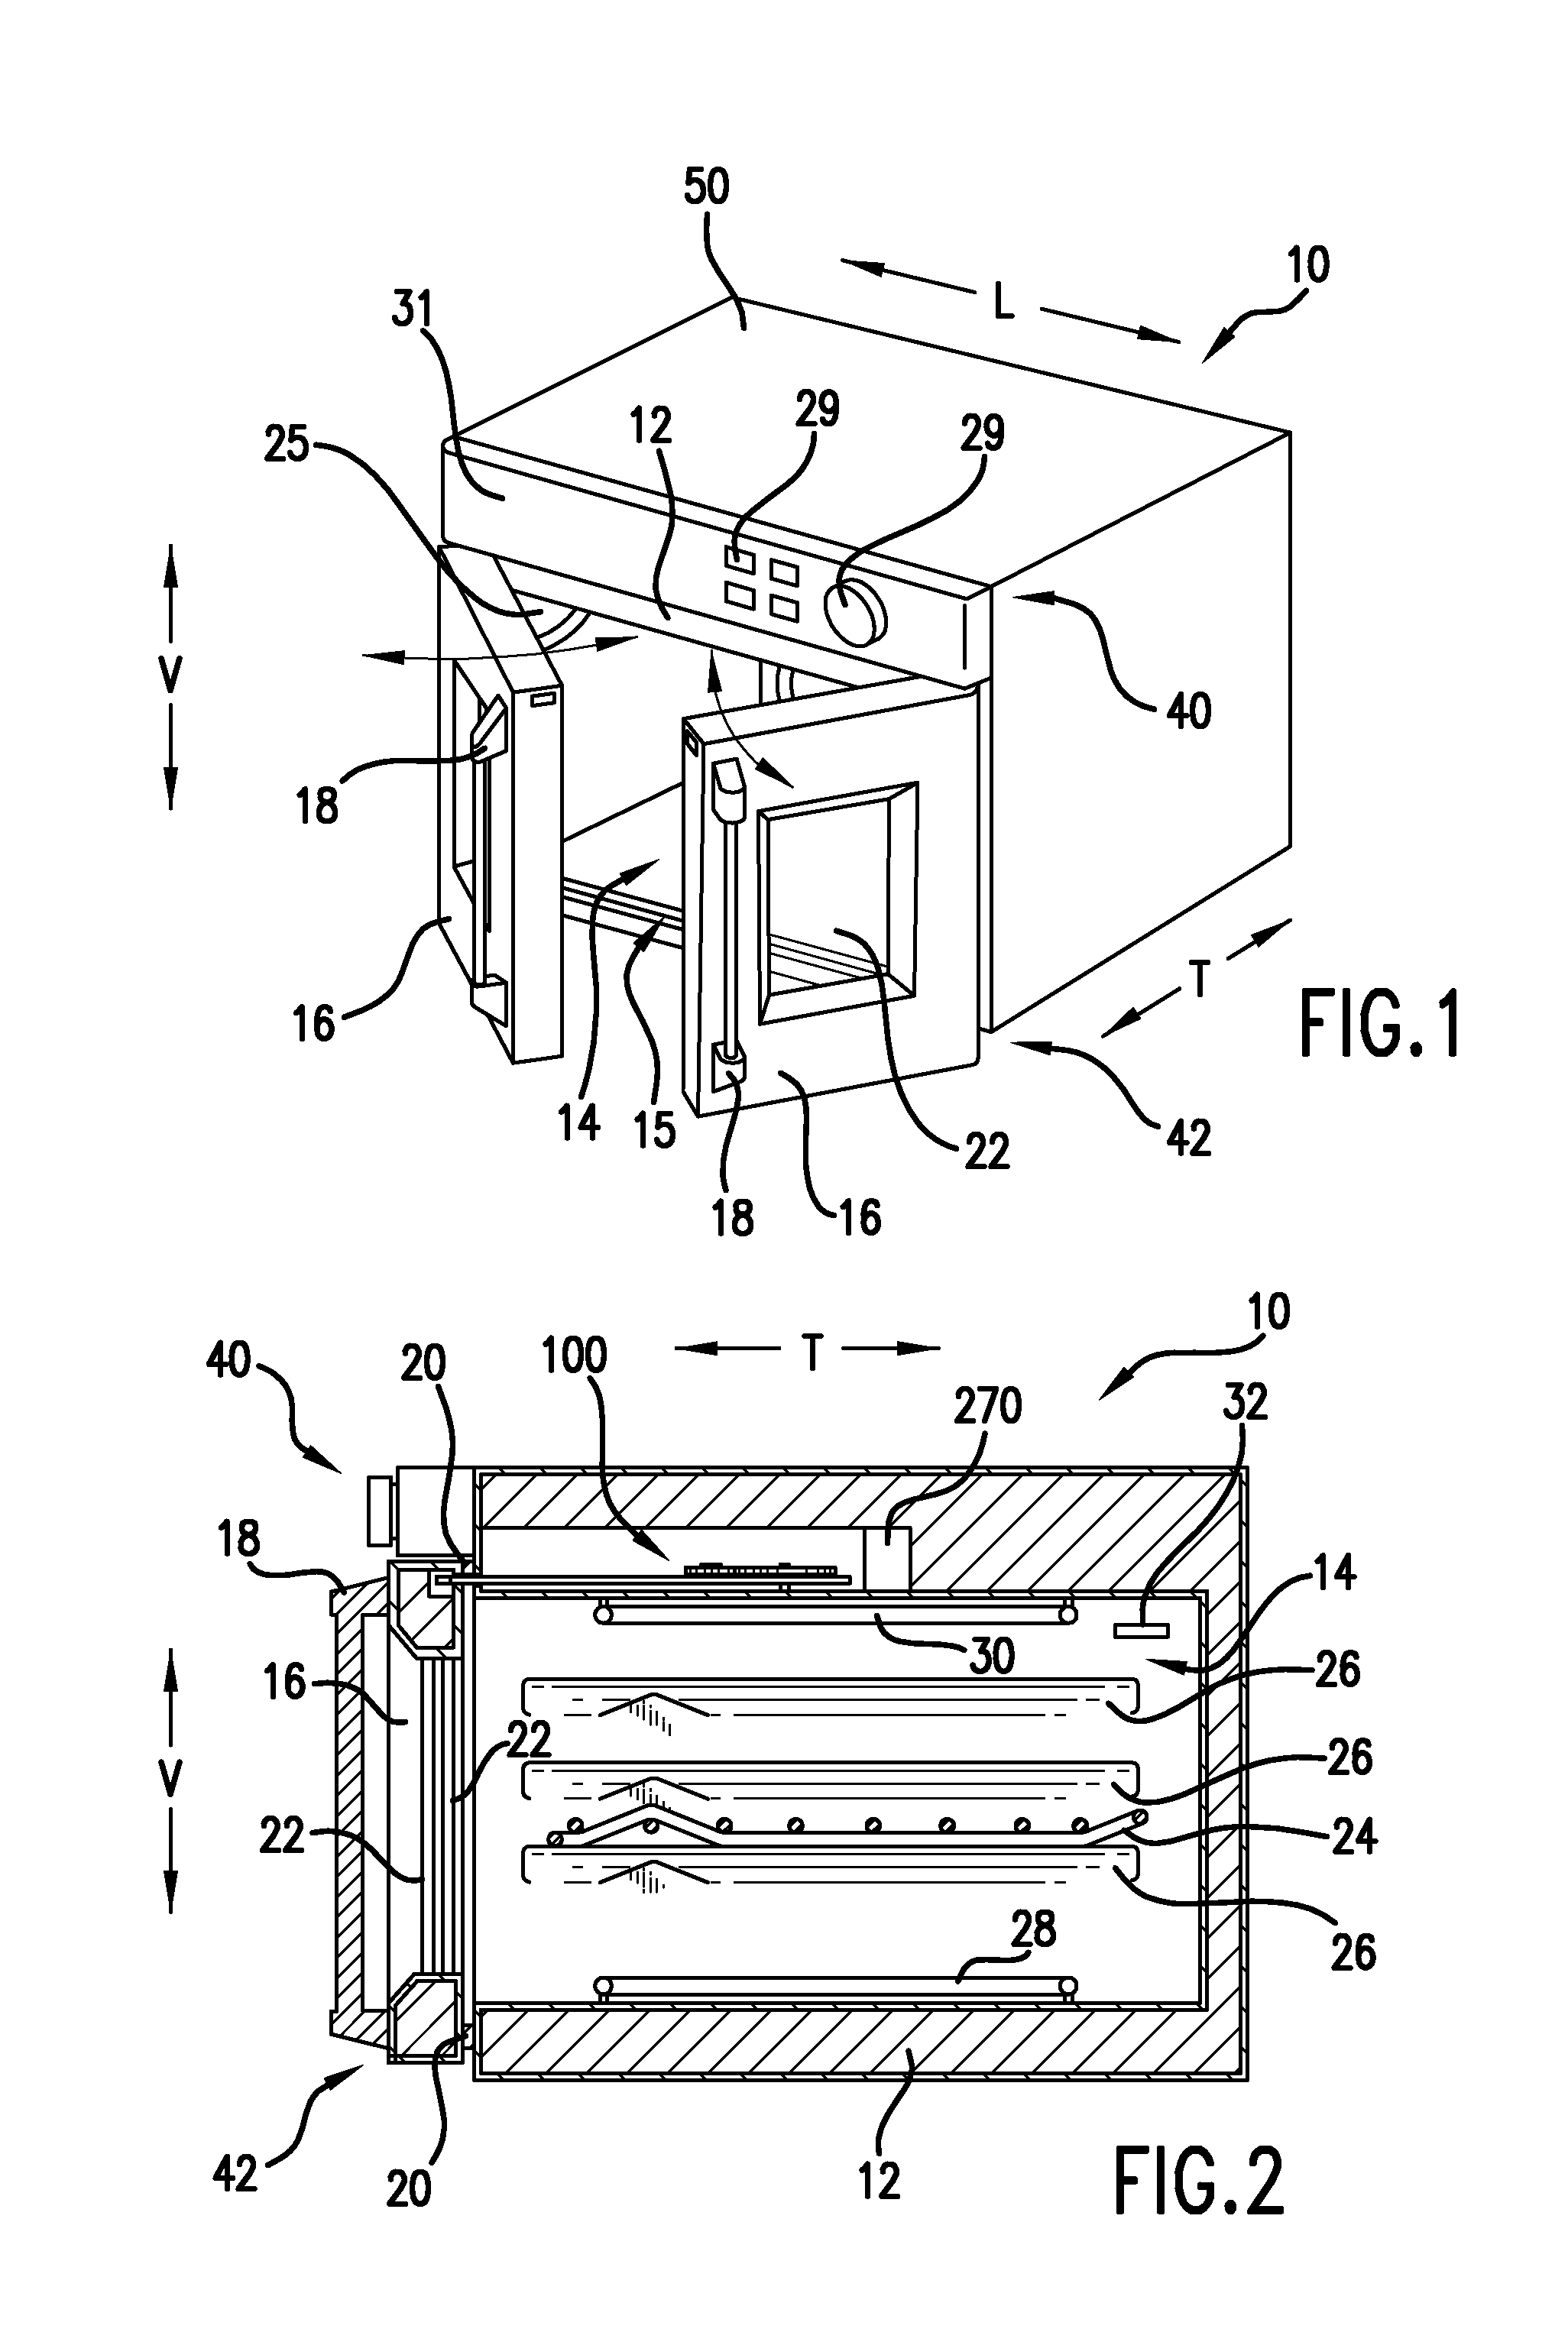 Oven appliance with dual opening and closing doors